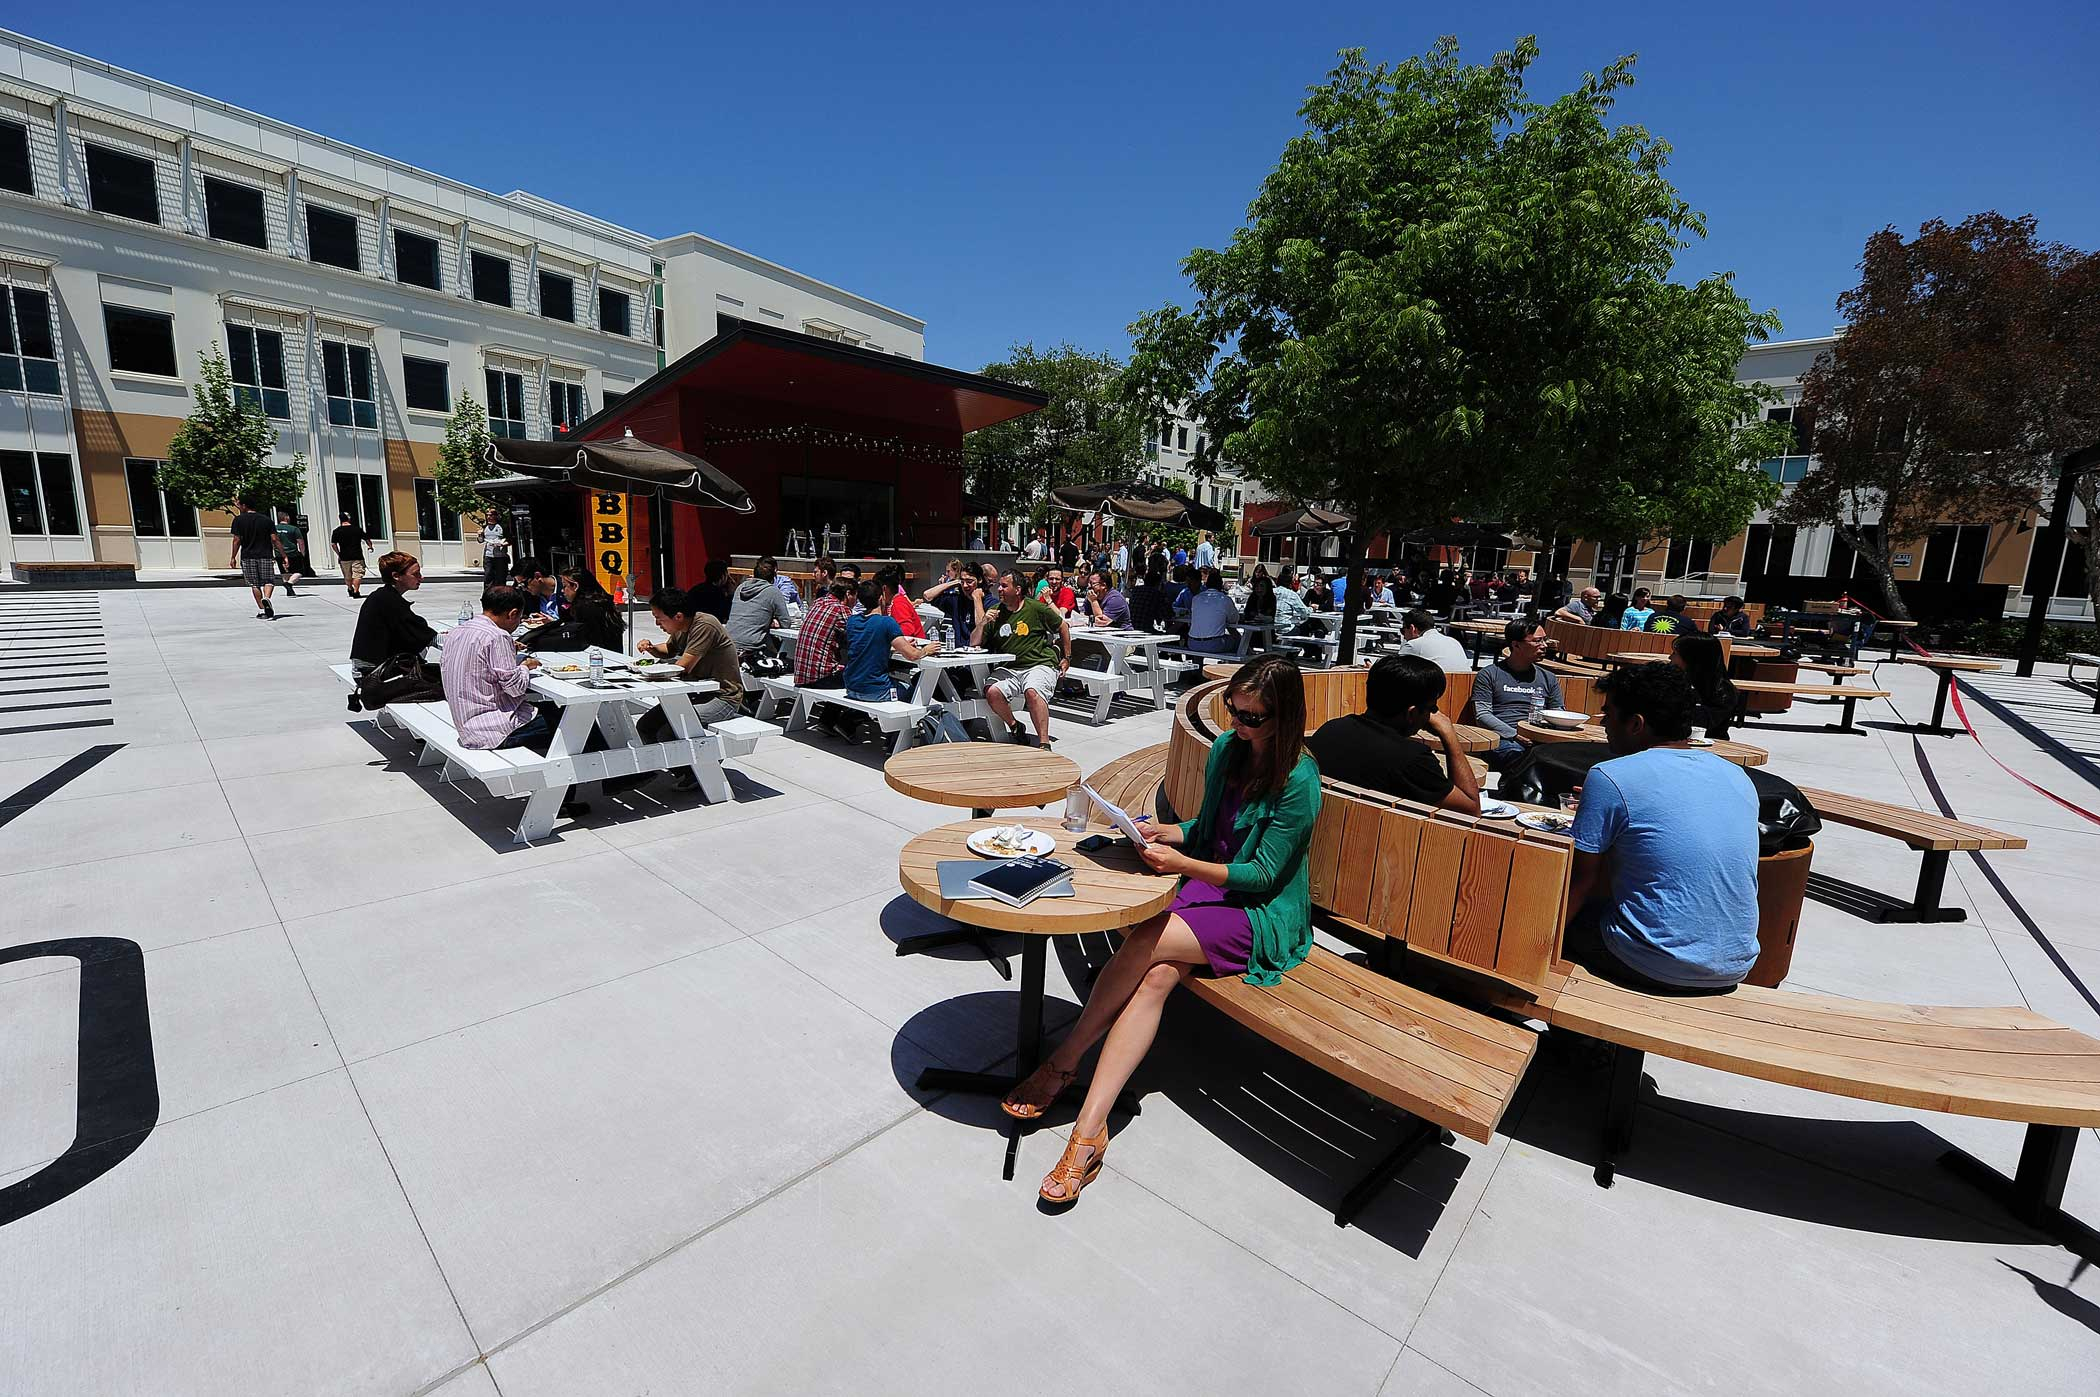 A general view of the outdoor lunch and relaxtion area at the old Facebook main campus in Menlo Park, California on May 15, 2012.